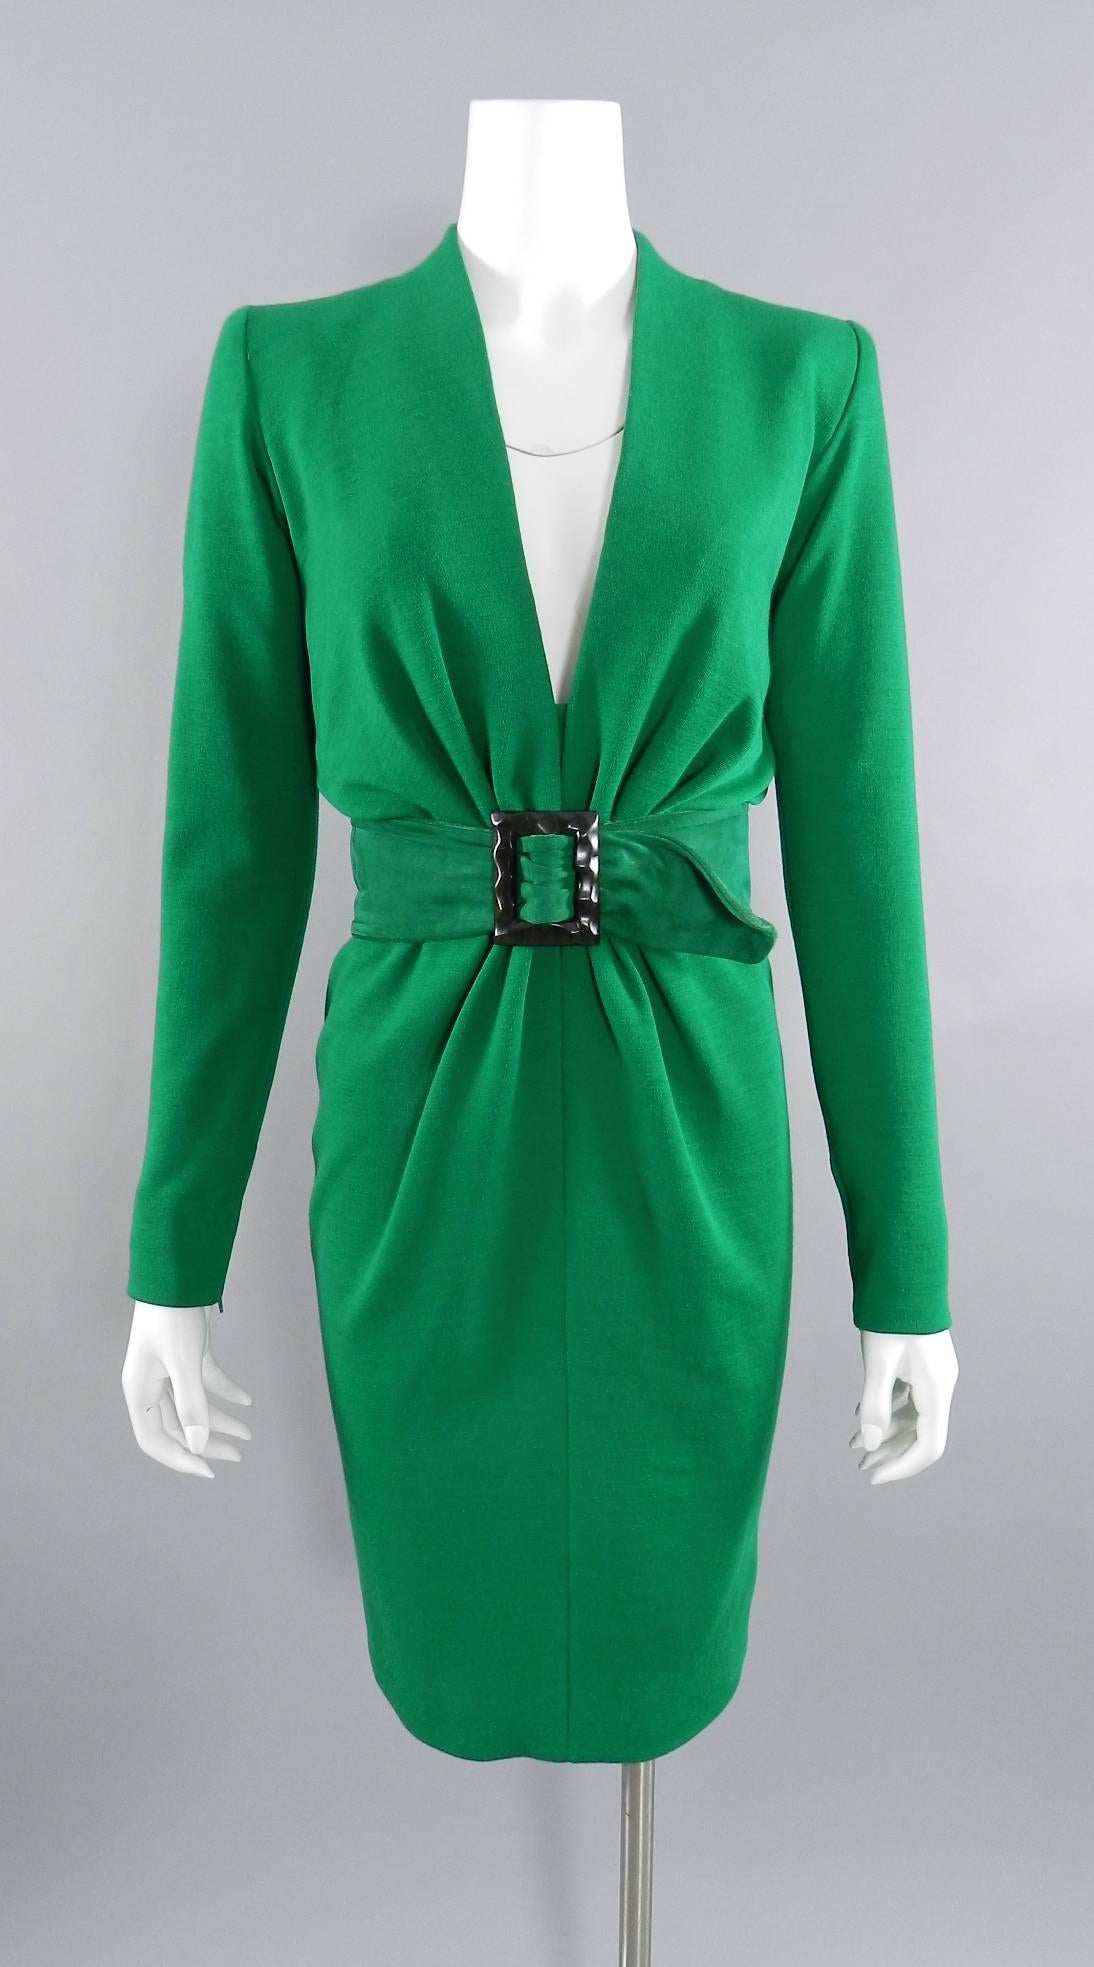 YSL Yves Saint Laurent Haute Couture Vintage 1990's Green Wool Knit Jersey Dress 5